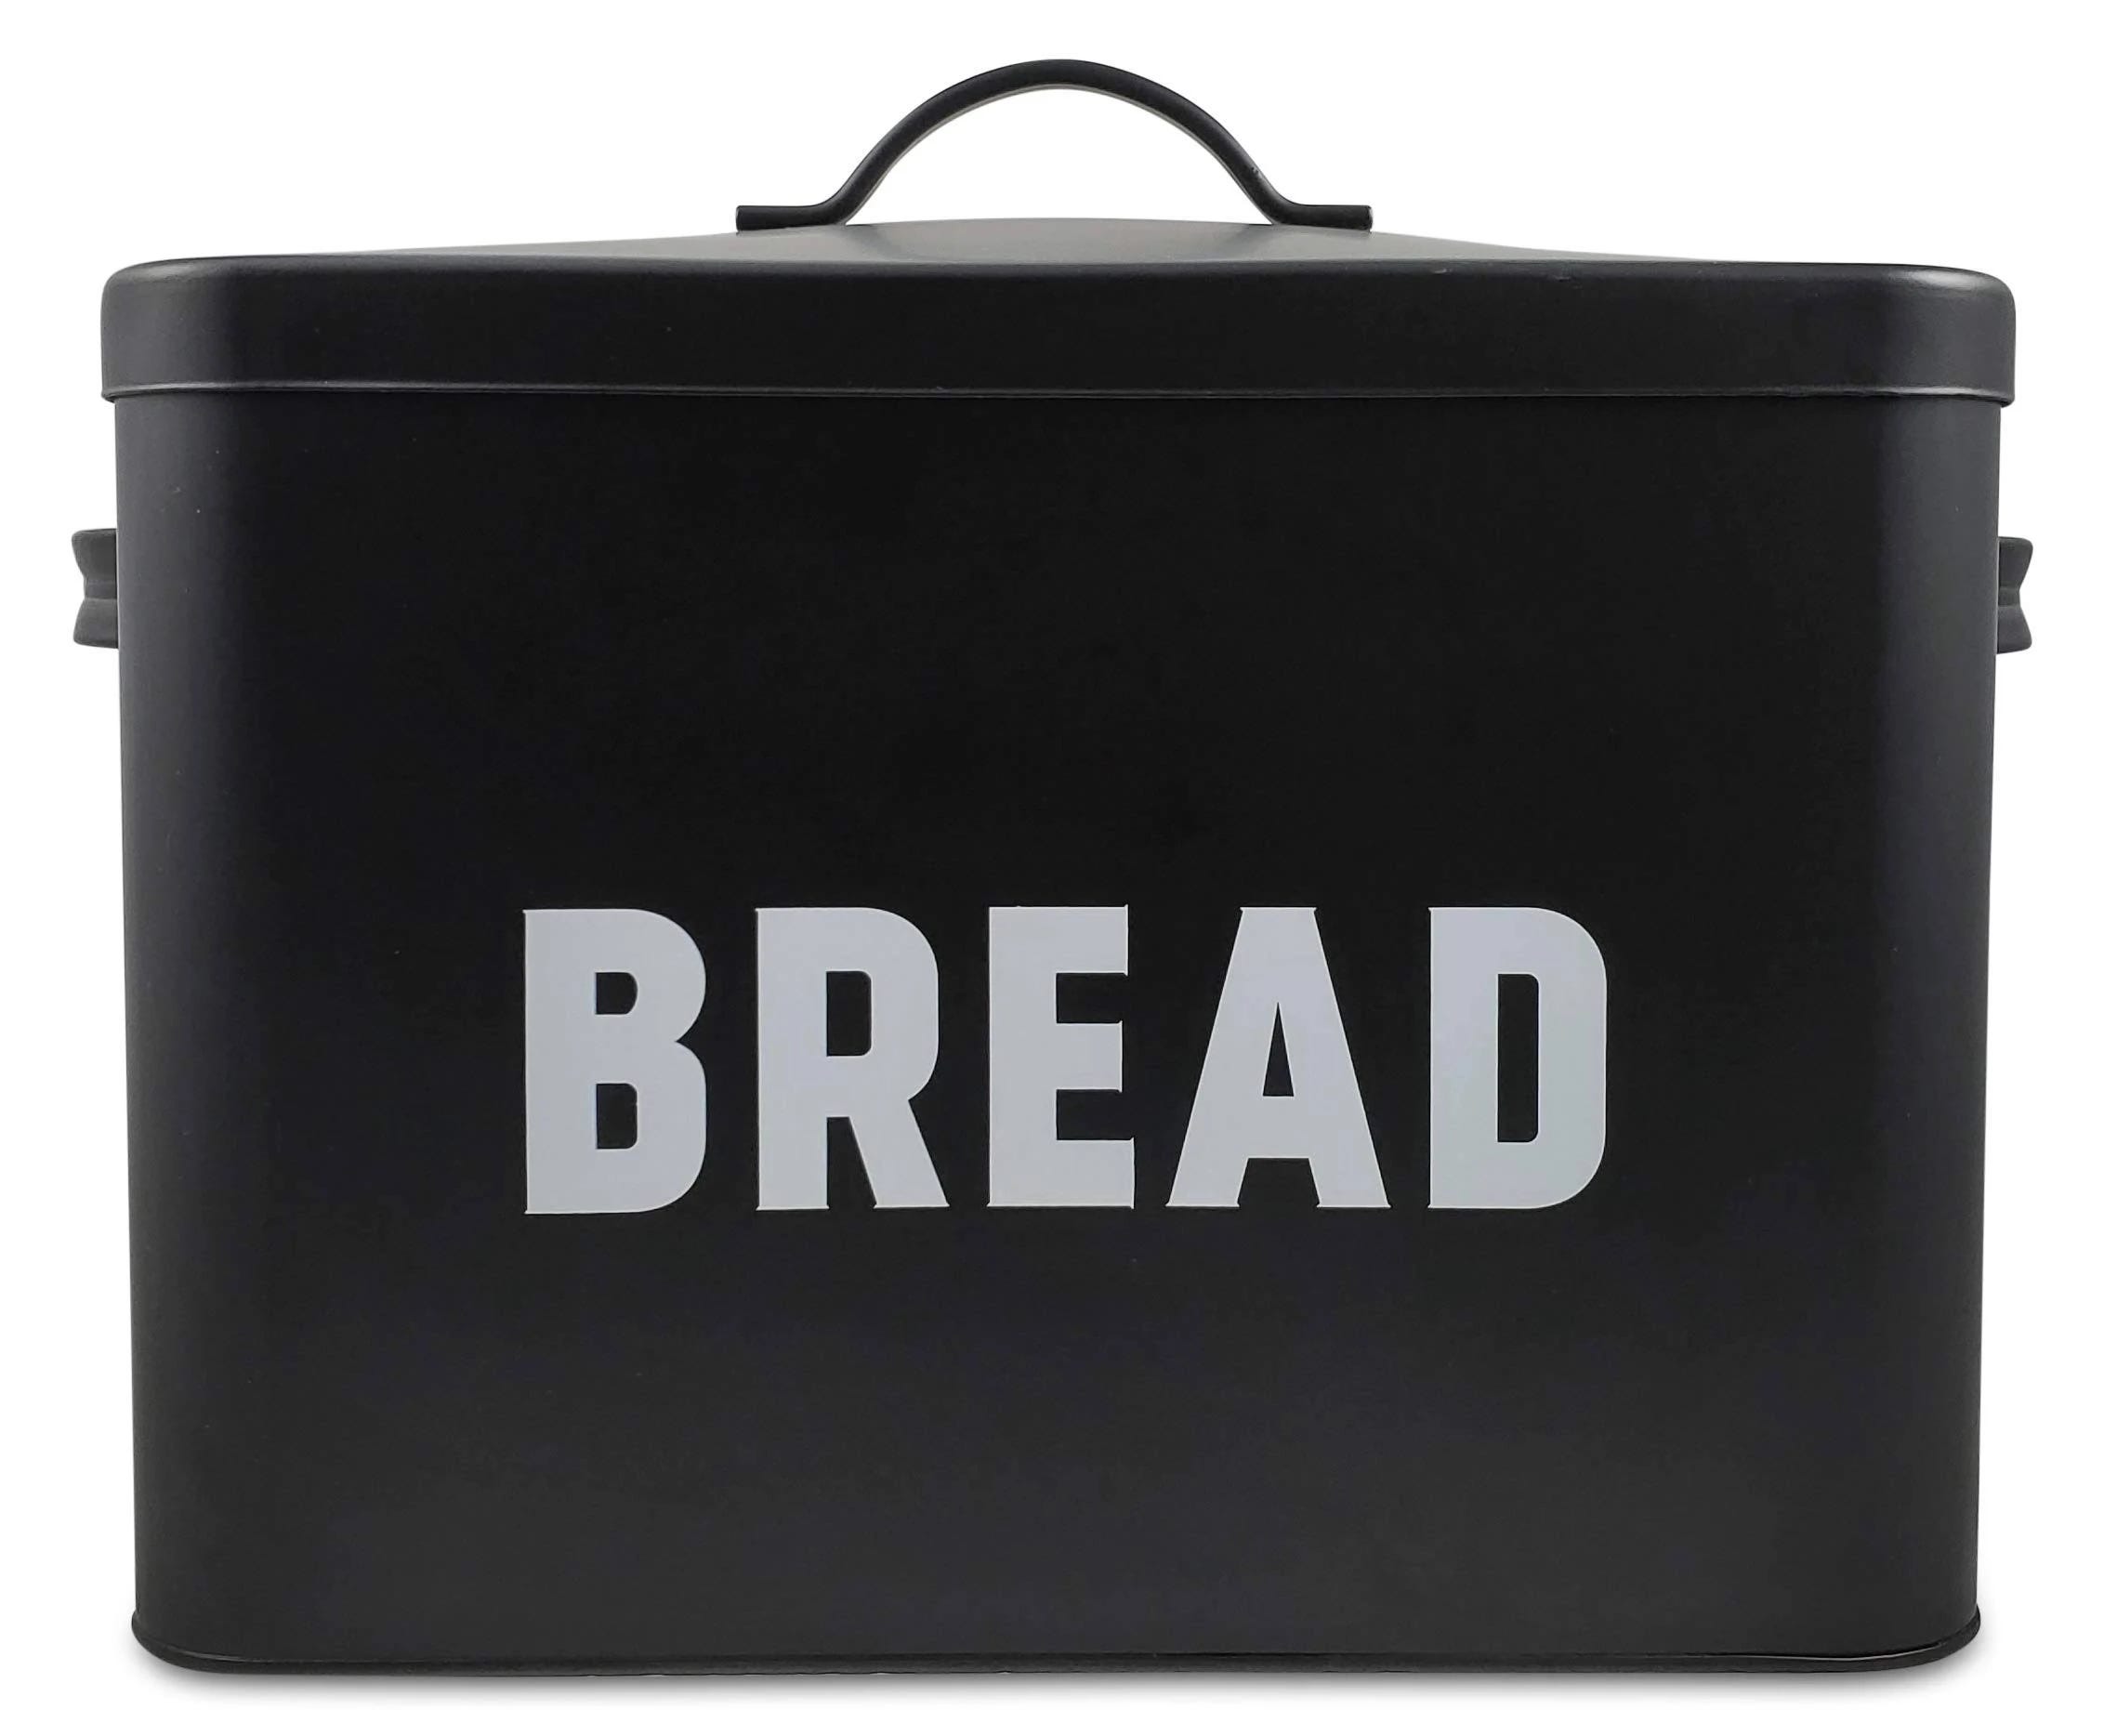 Space-Saving Metal Bread Box for Your Countertop | Image